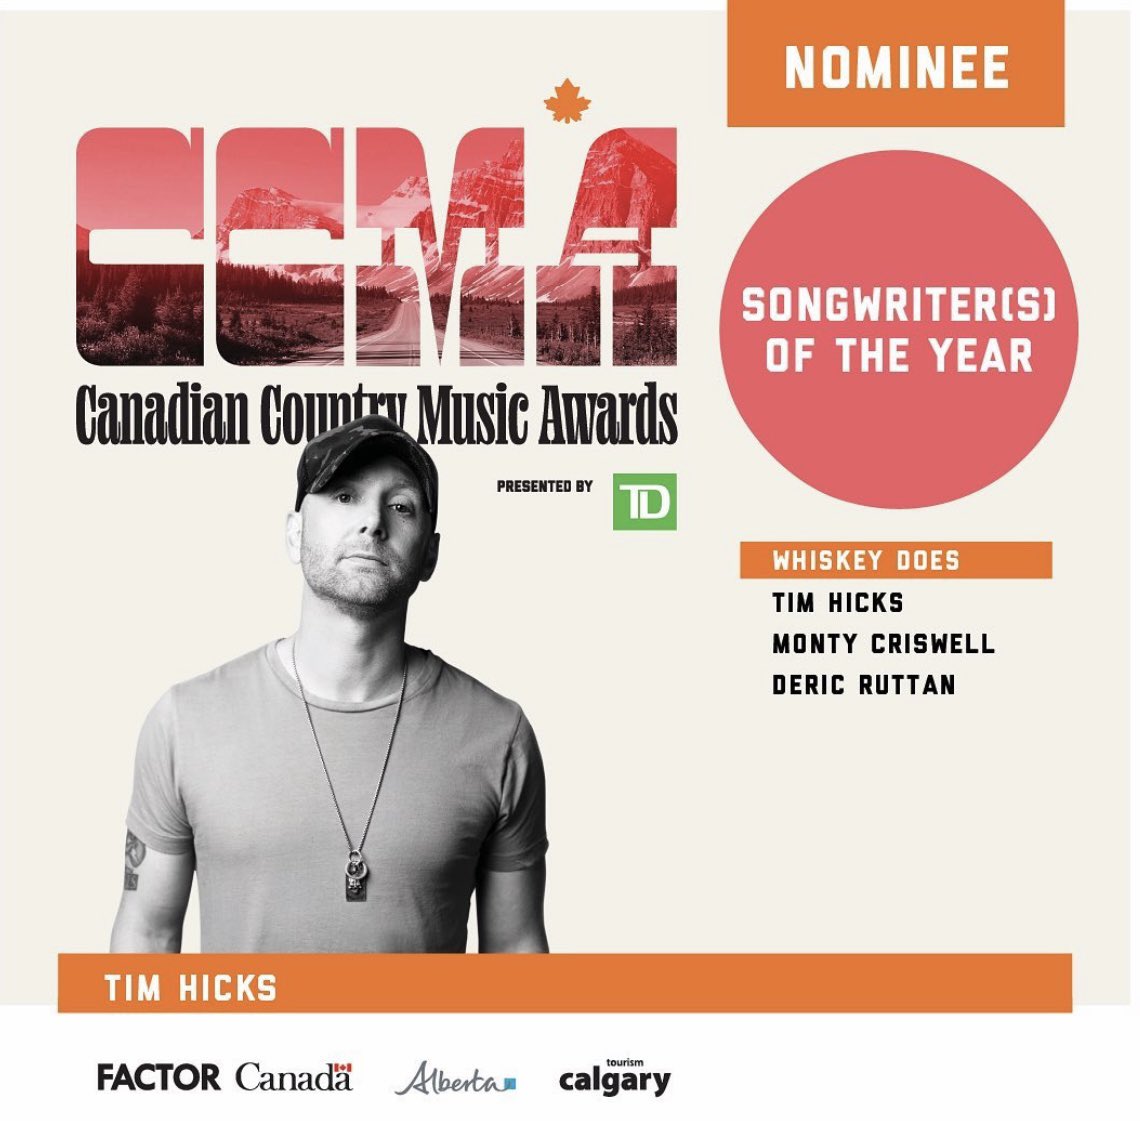 Thanks for the love today, CCMA! Thankful to be nominated for SOTY at this year’s Canadian Country Music Awards (alongside Tim Hicks and Monty Criswell), for writing Tim’s song “Whiskey Does”. Good luck to all the nominees! #whiskeydoes #ccmanomday @timhicksmusic @CCMAofficial